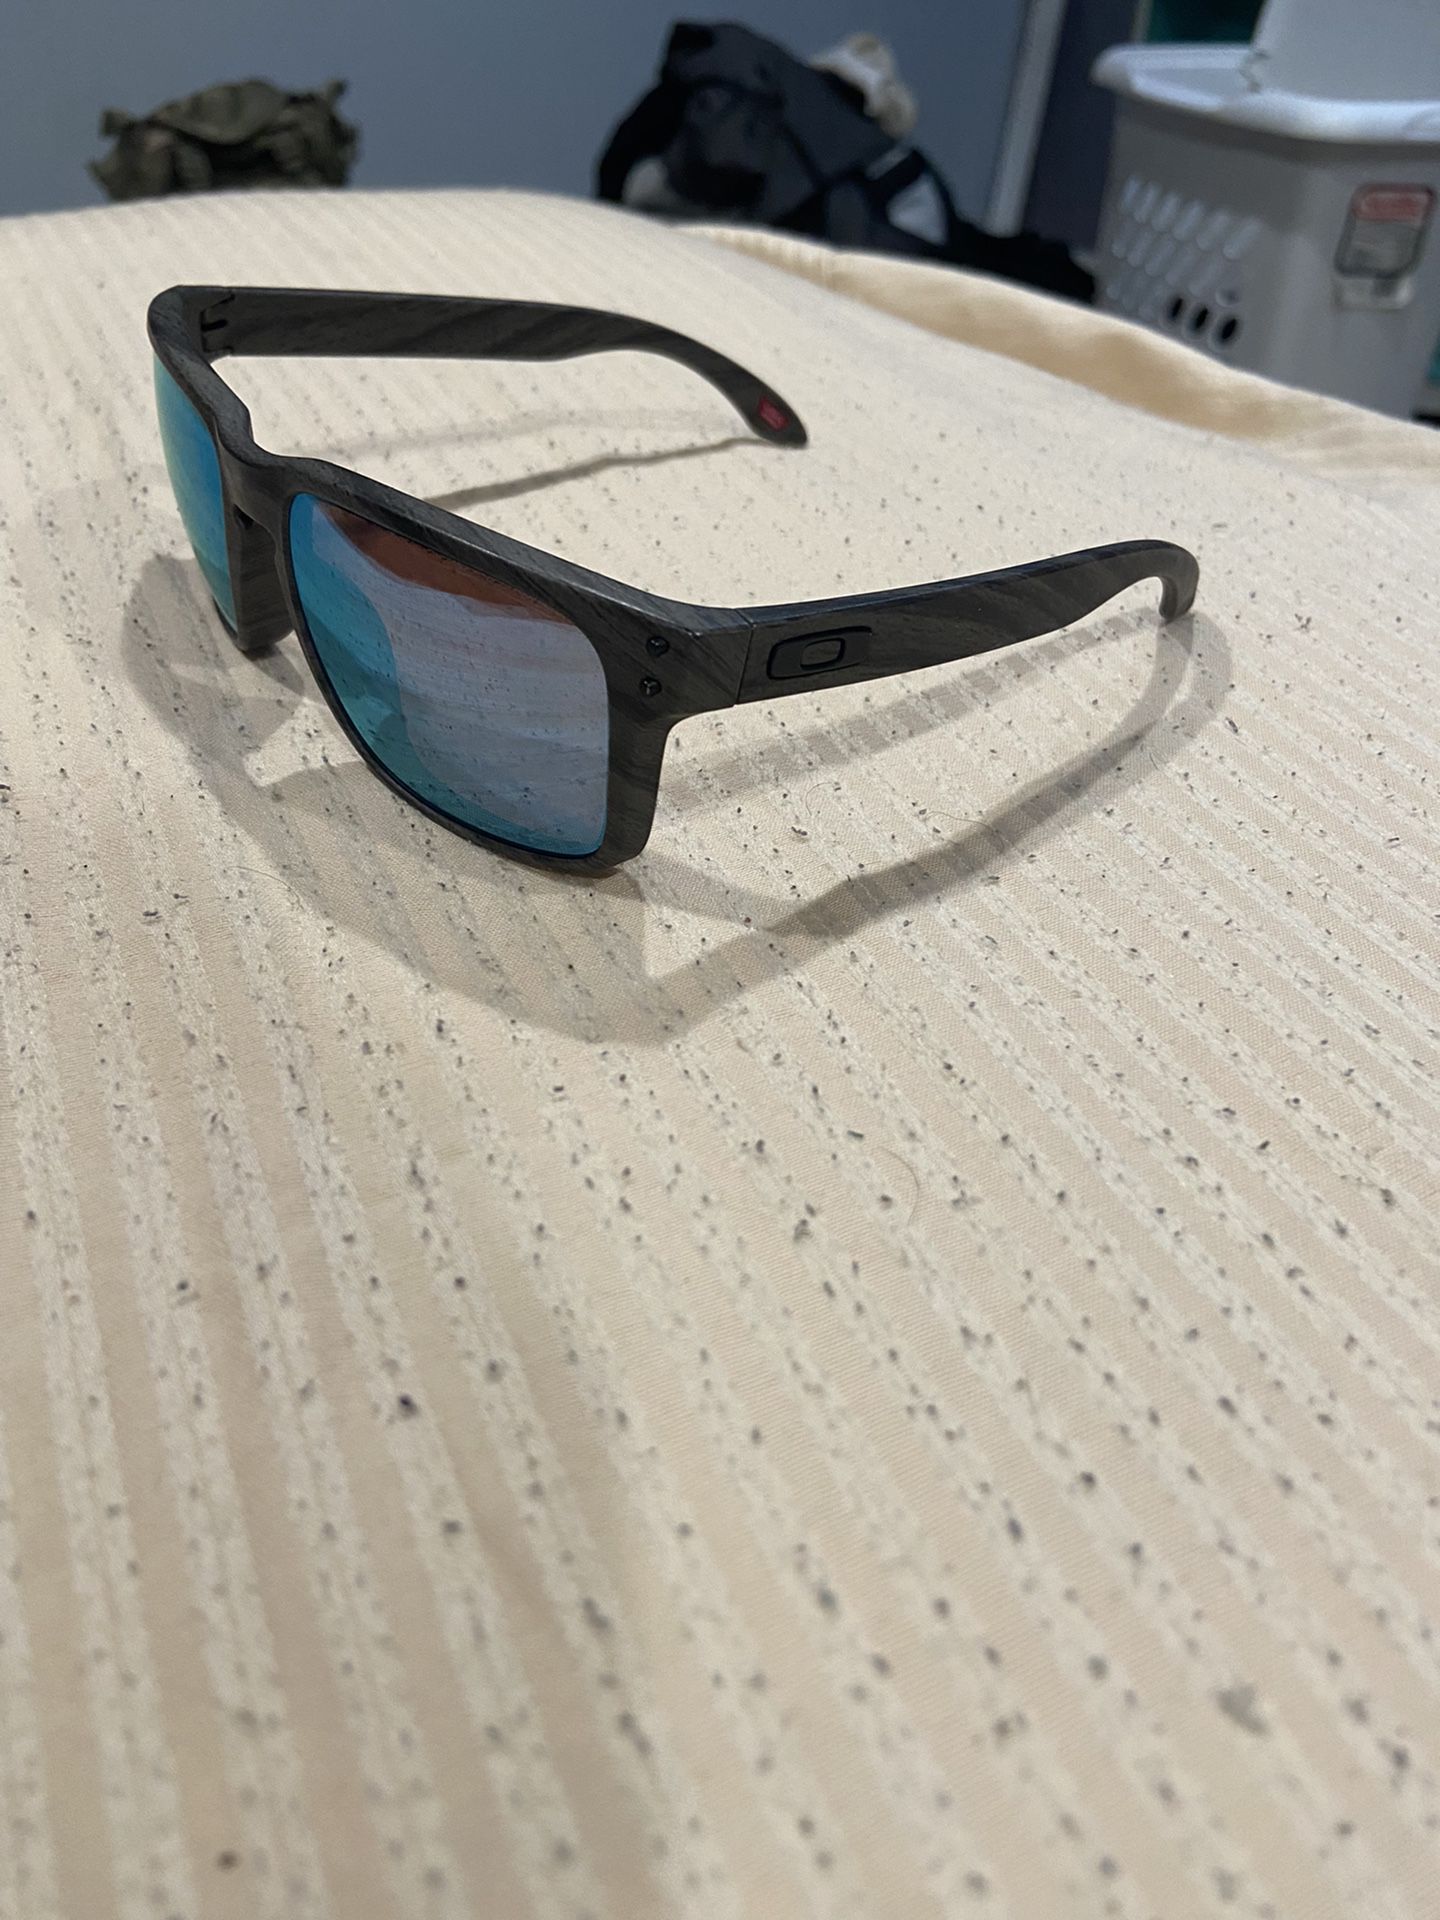 Oakley Sunglasses for Sale in Levittown, PA - OfferUp